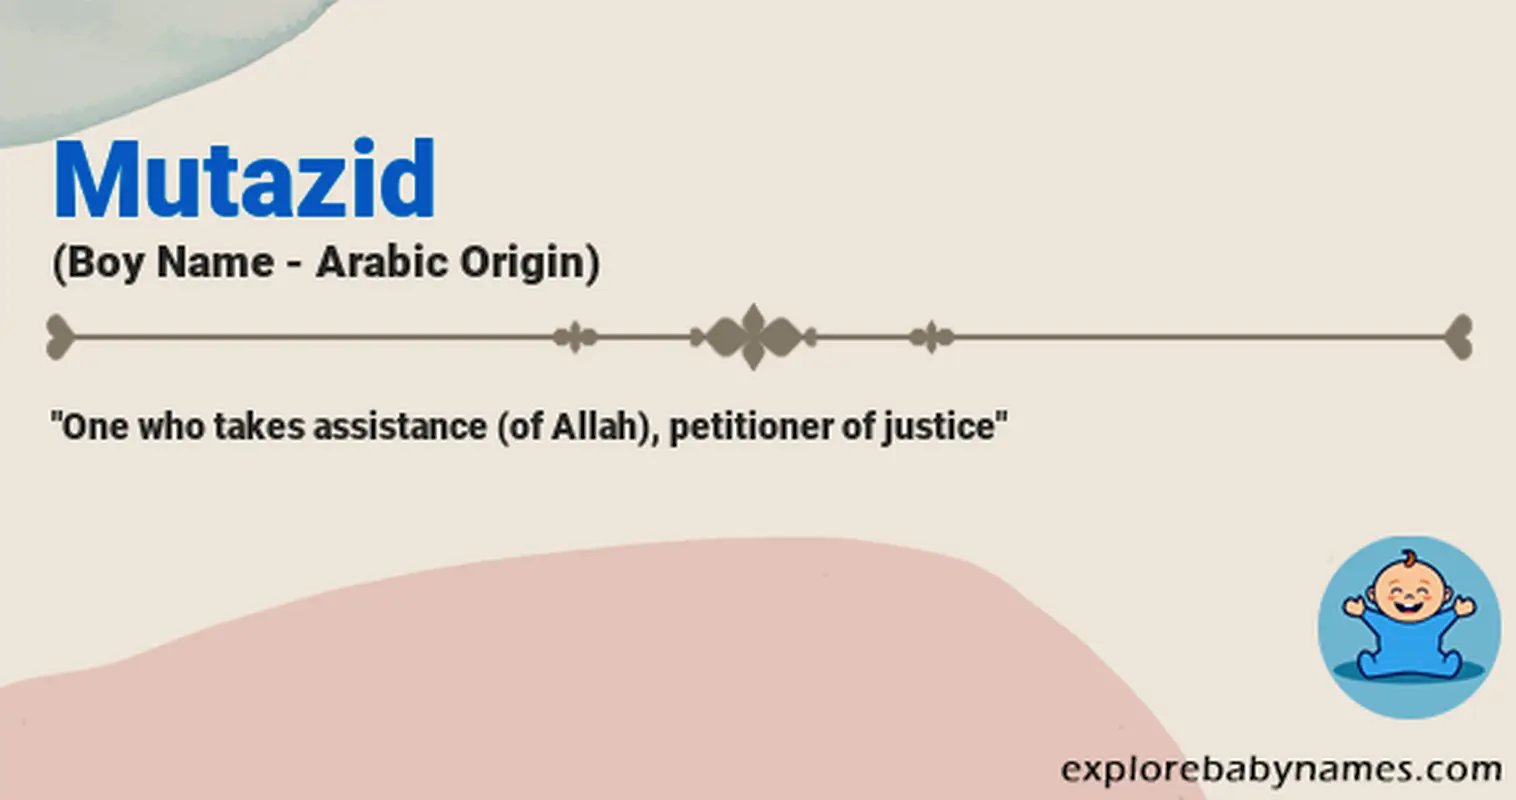 Meaning of Mutazid